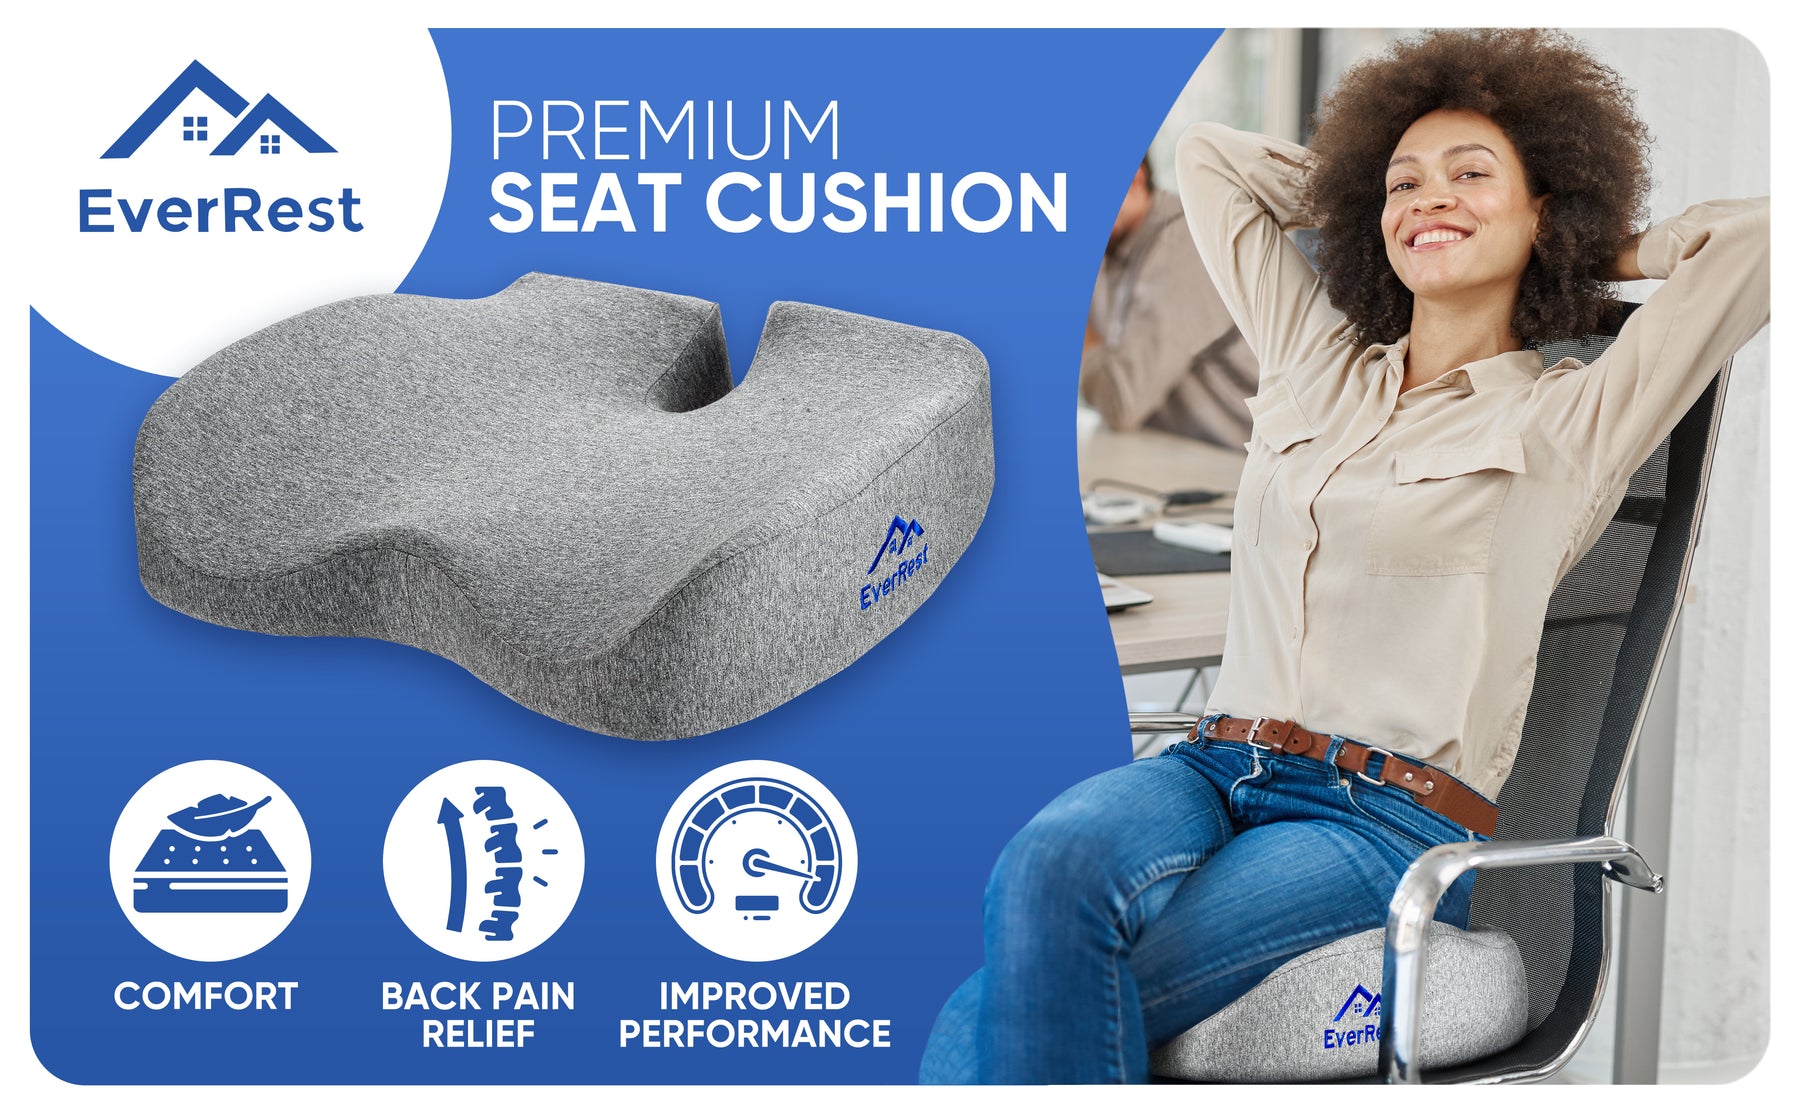 lower back support cushion